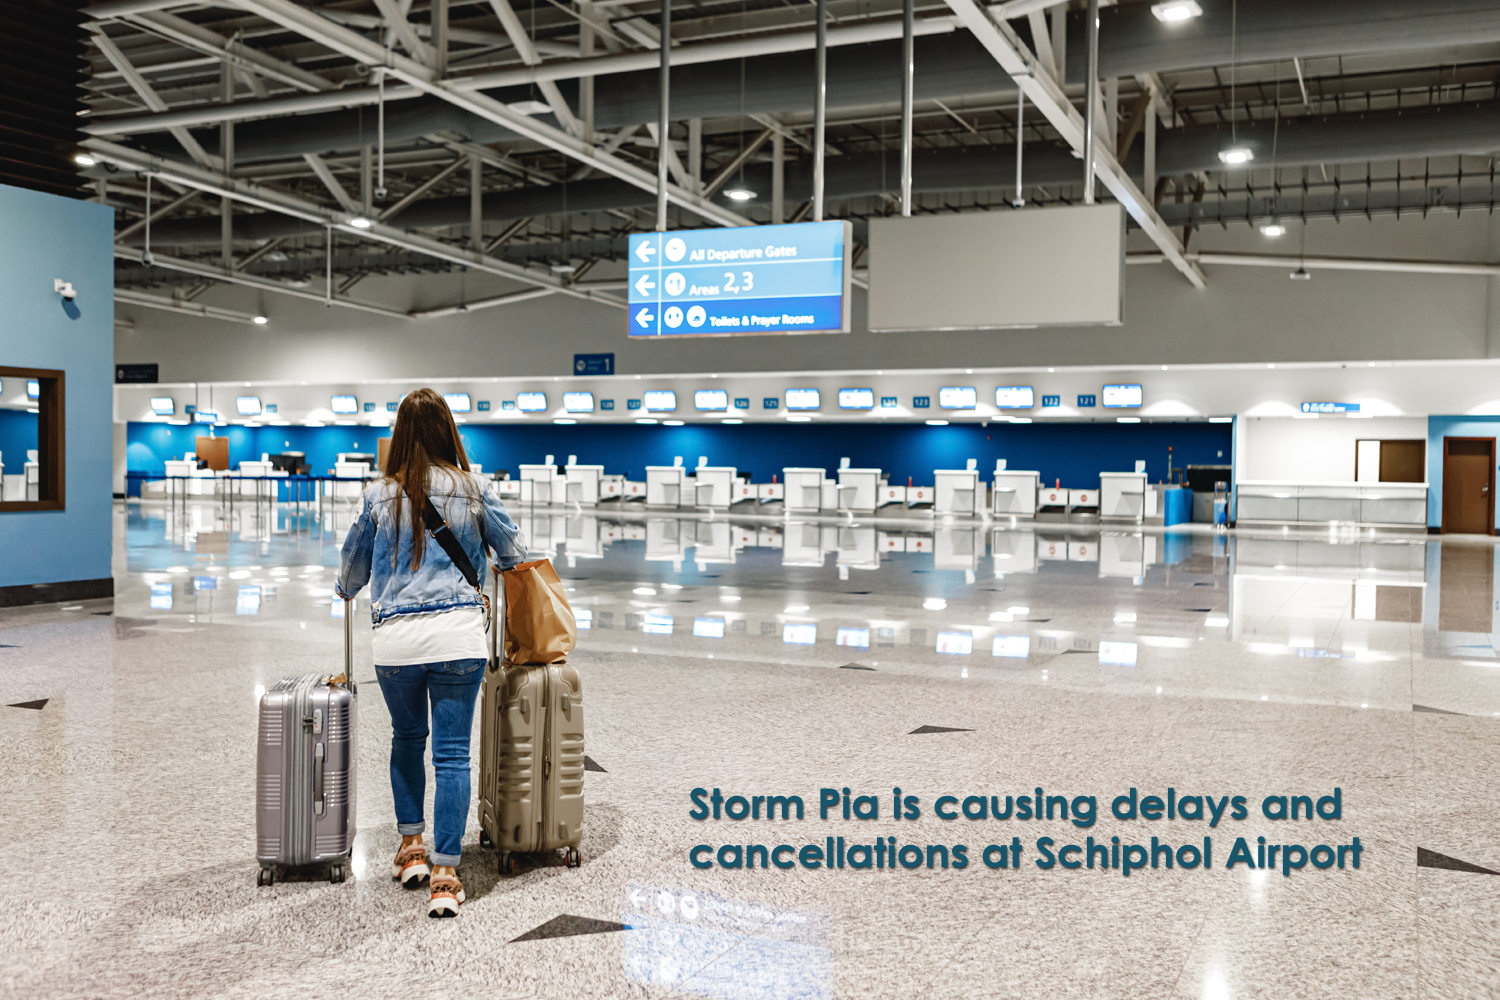 Storm Pia is causing delays and cancellations at Schiphol Airport.